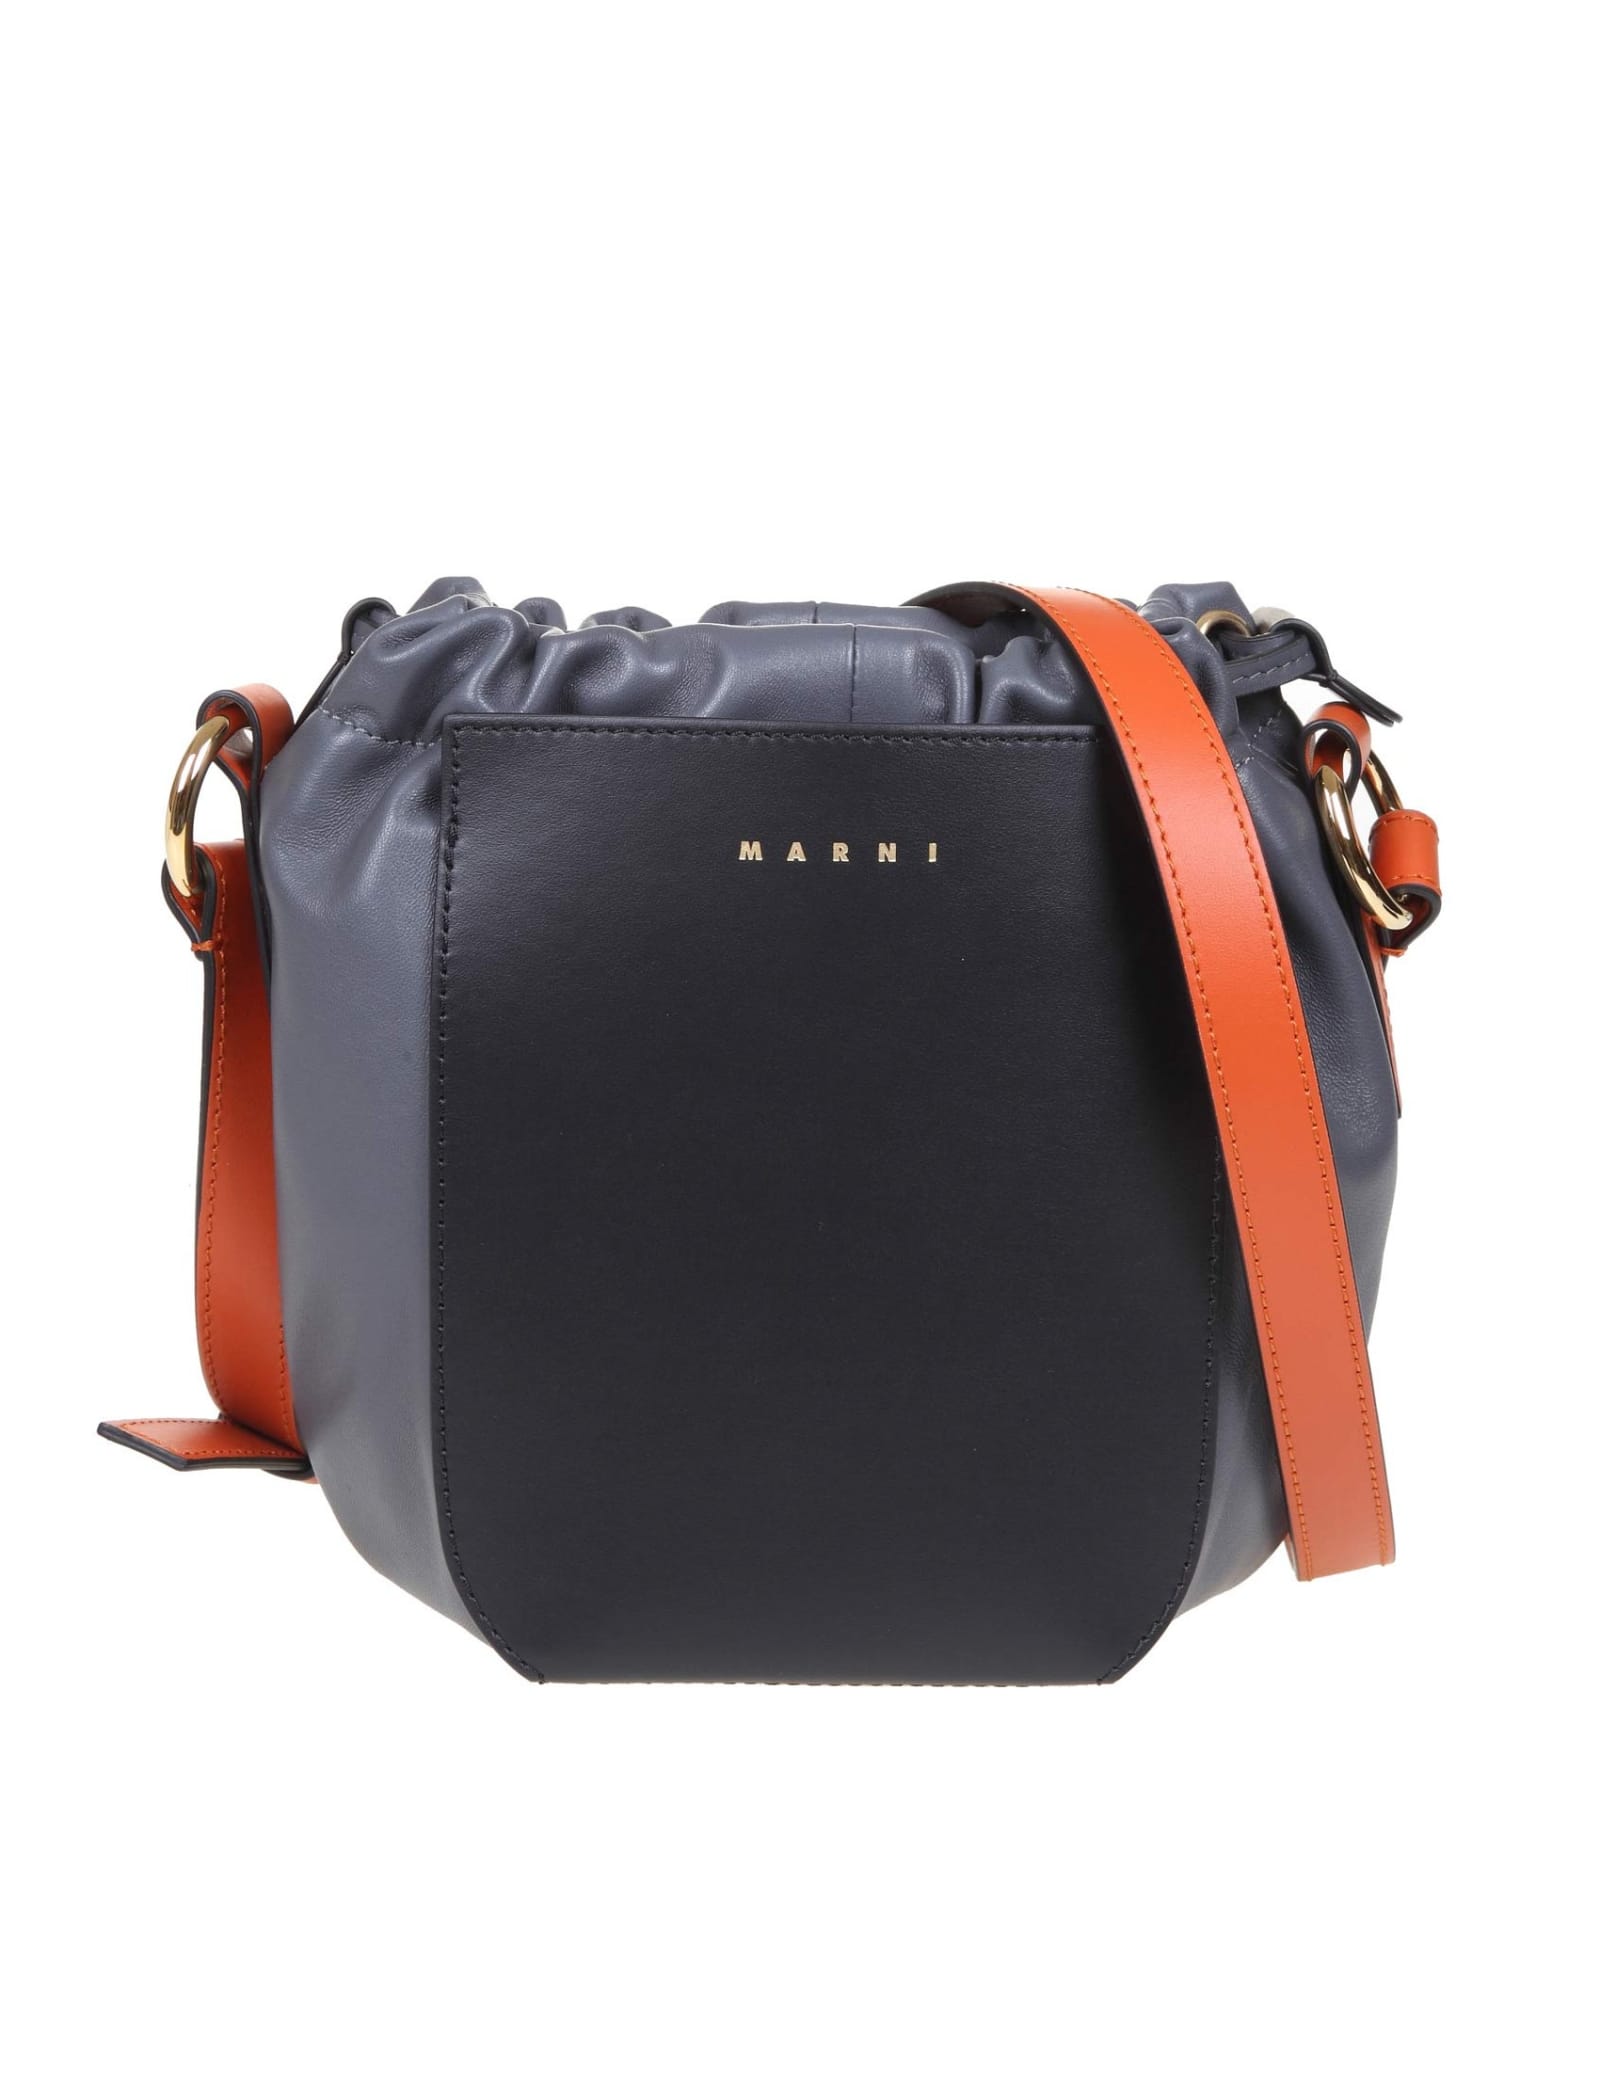 Marni Gusset Bucket In Leather